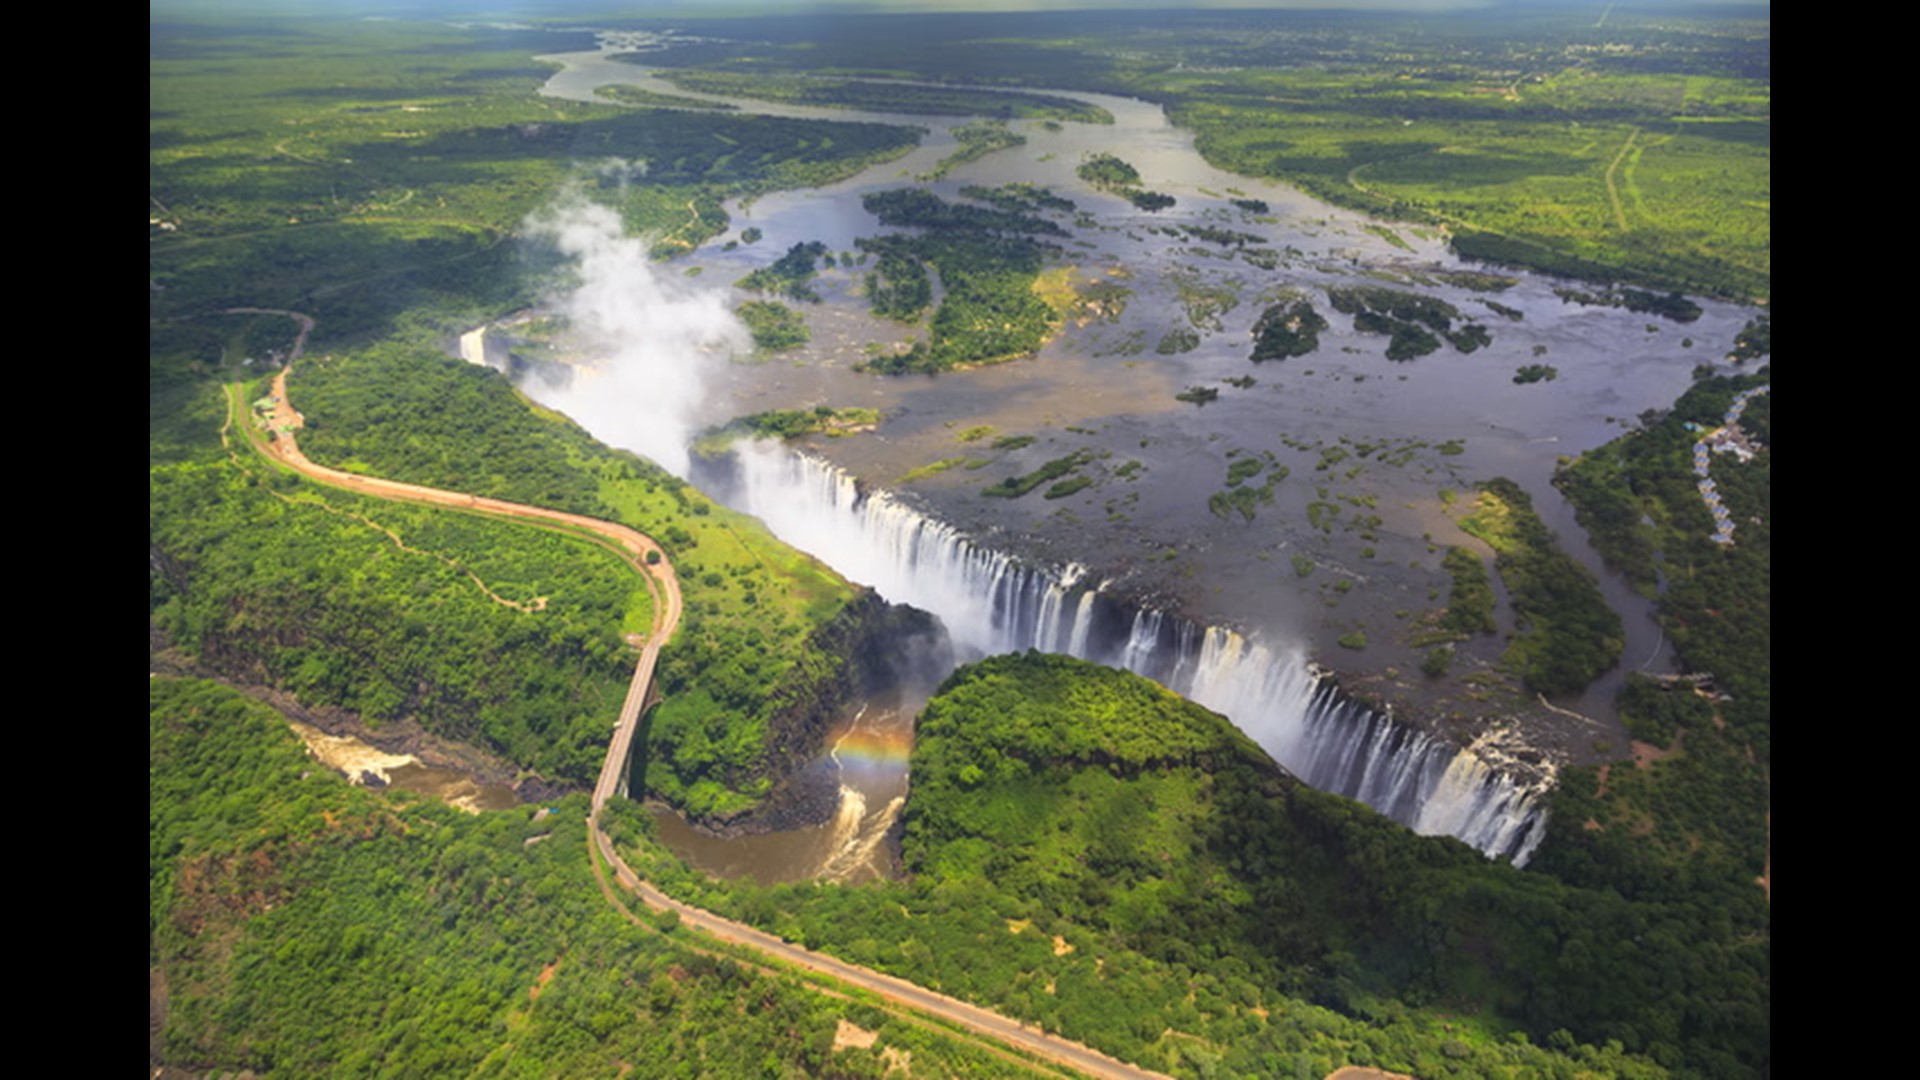 Victoria Falls sits between two East African countries and is one of the seventh wonders of the world.